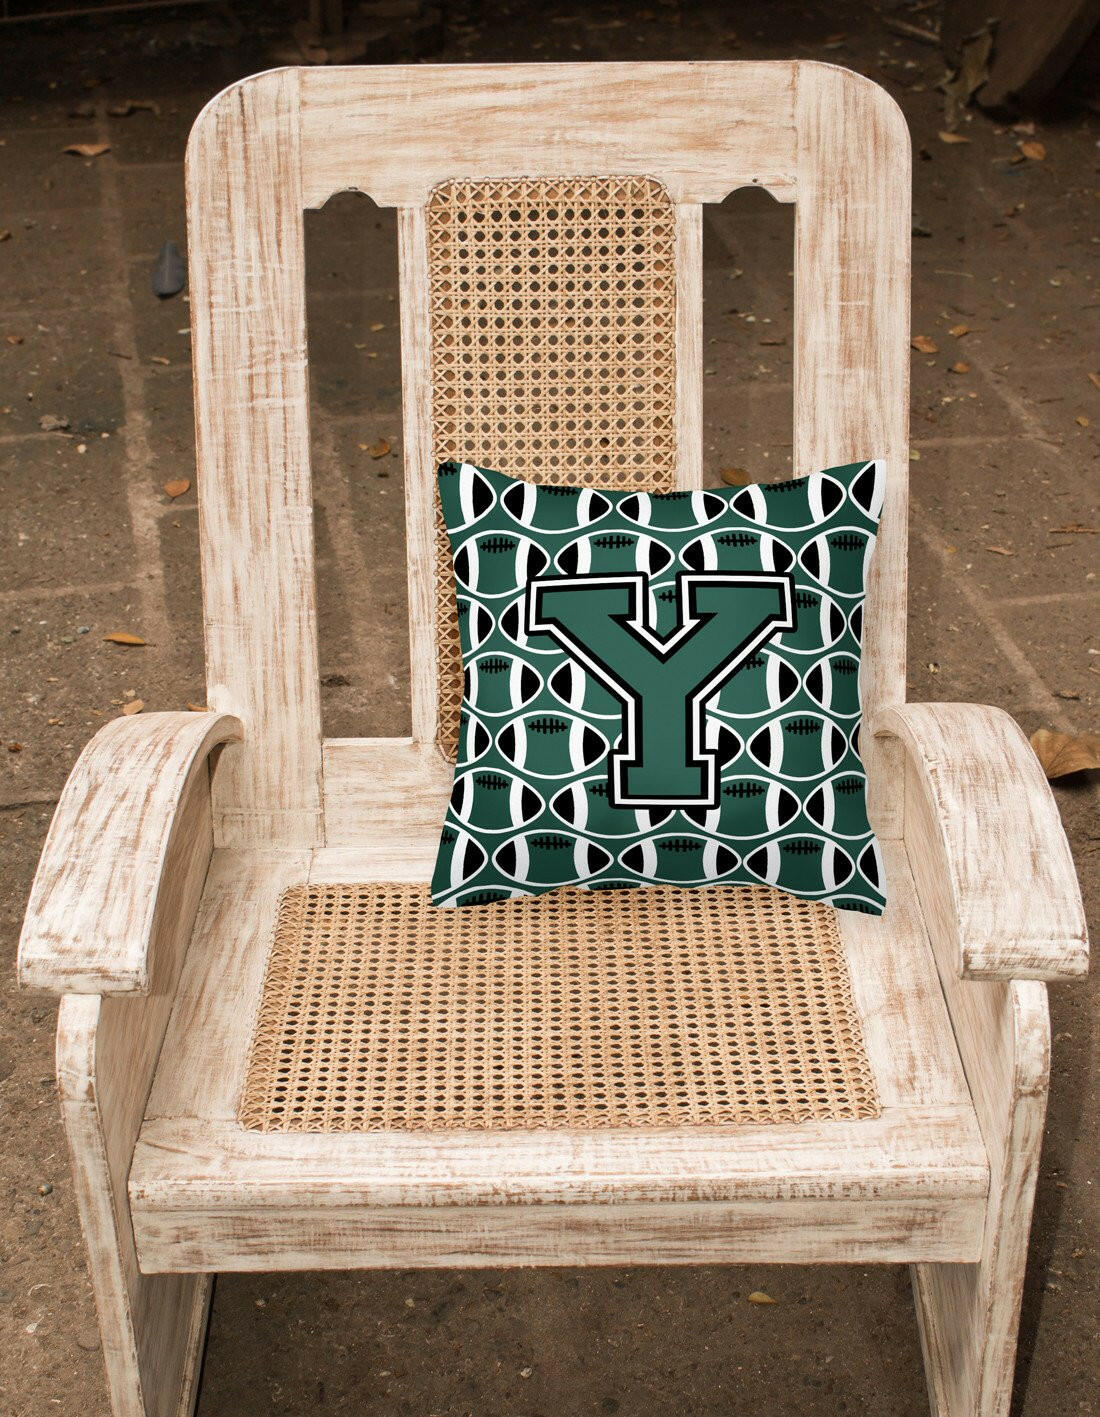 Letter Y Football Green and White Fabric Decorative Pillow CJ1071-YPW1414 by Caroline's Treasures